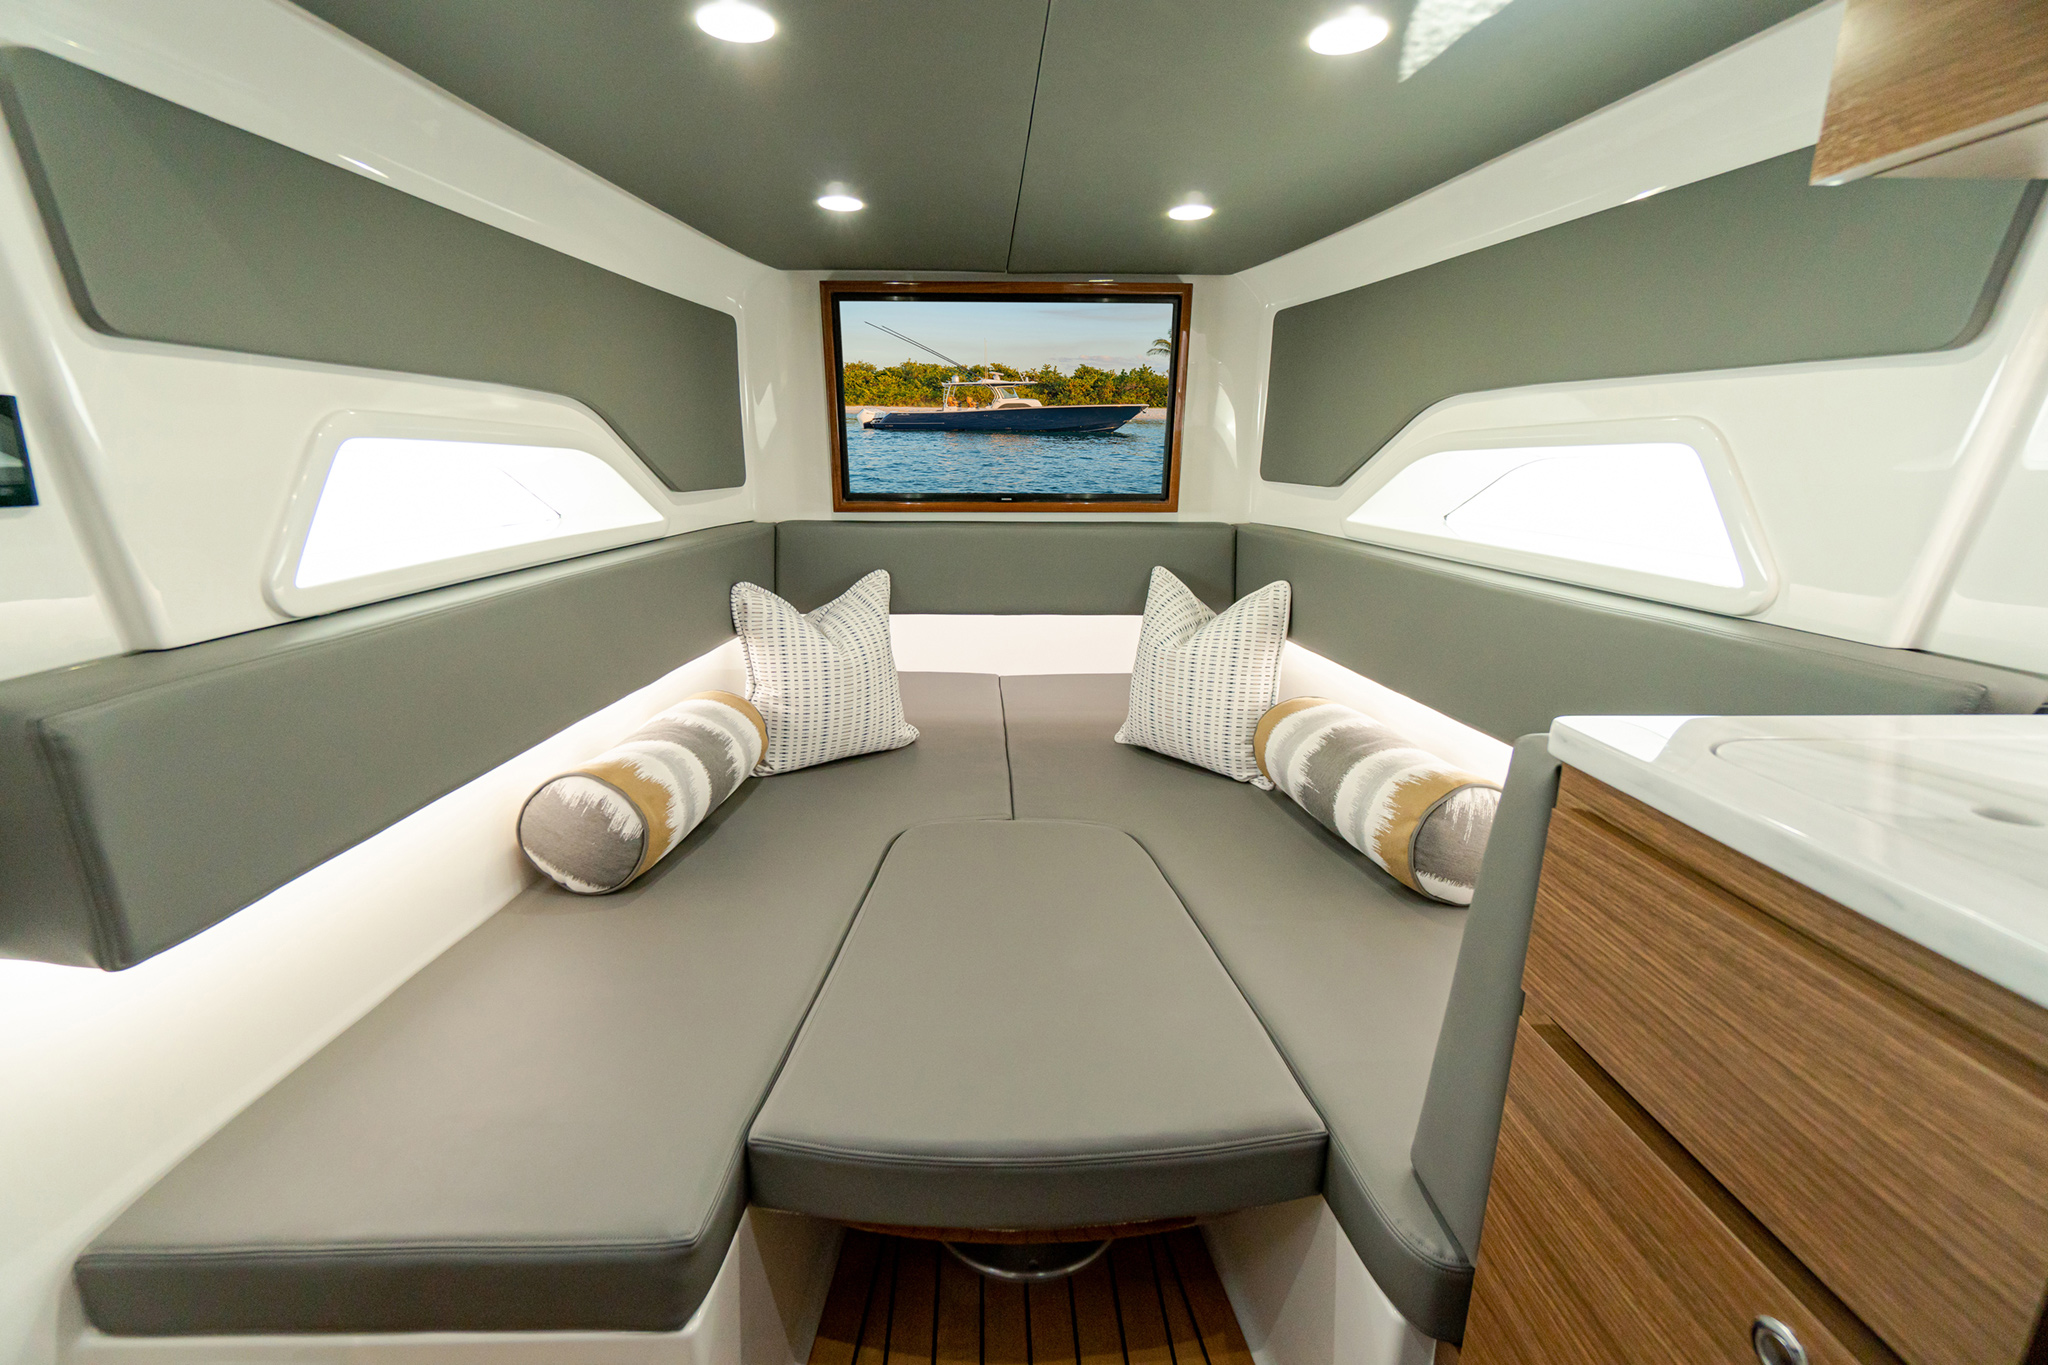 Dinette converts to a queen berth.